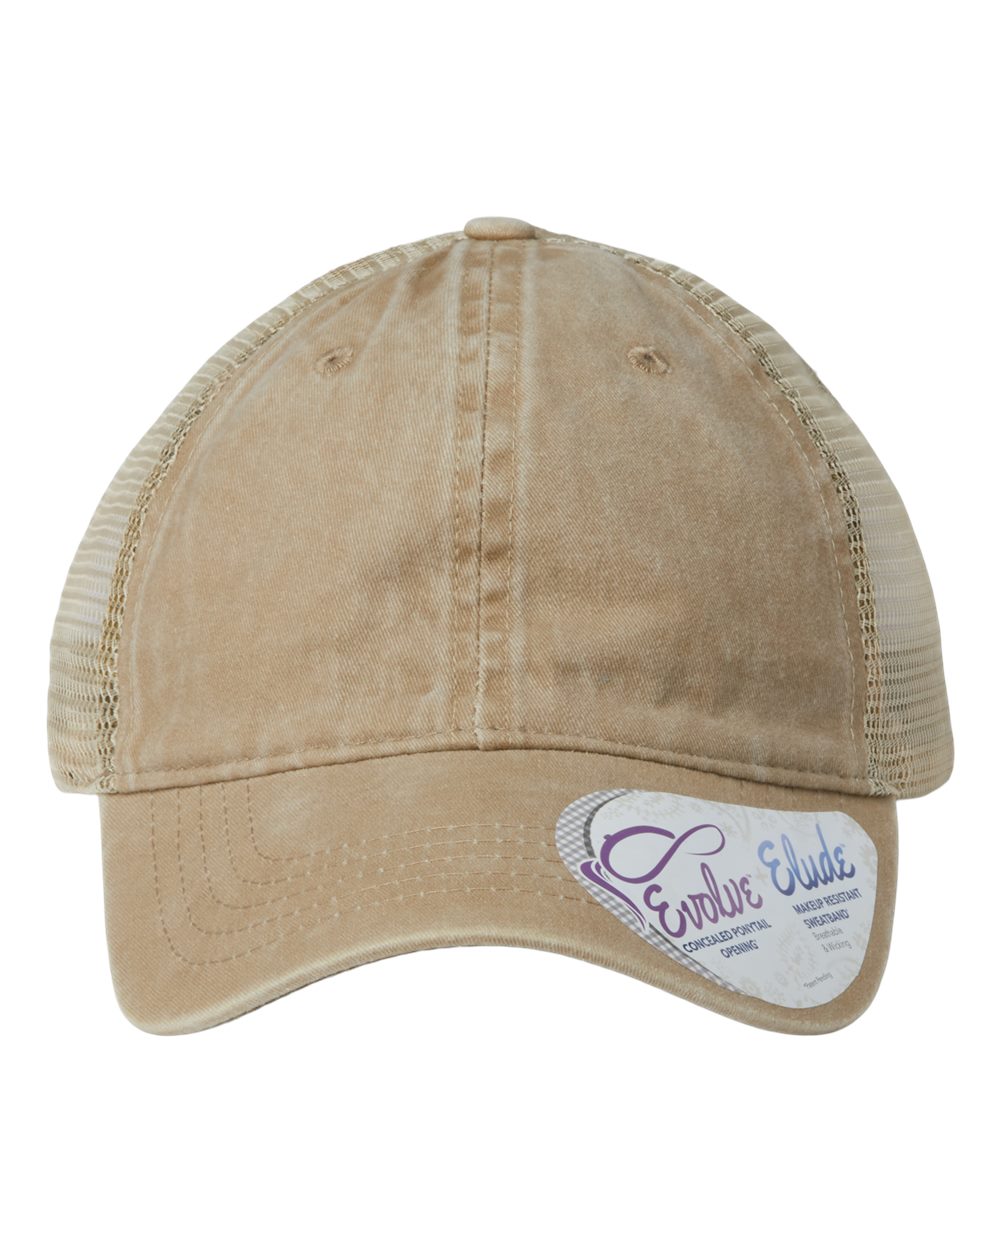 A women's washed mesh-back cap in khaki with camouflage pattern on the front panel.